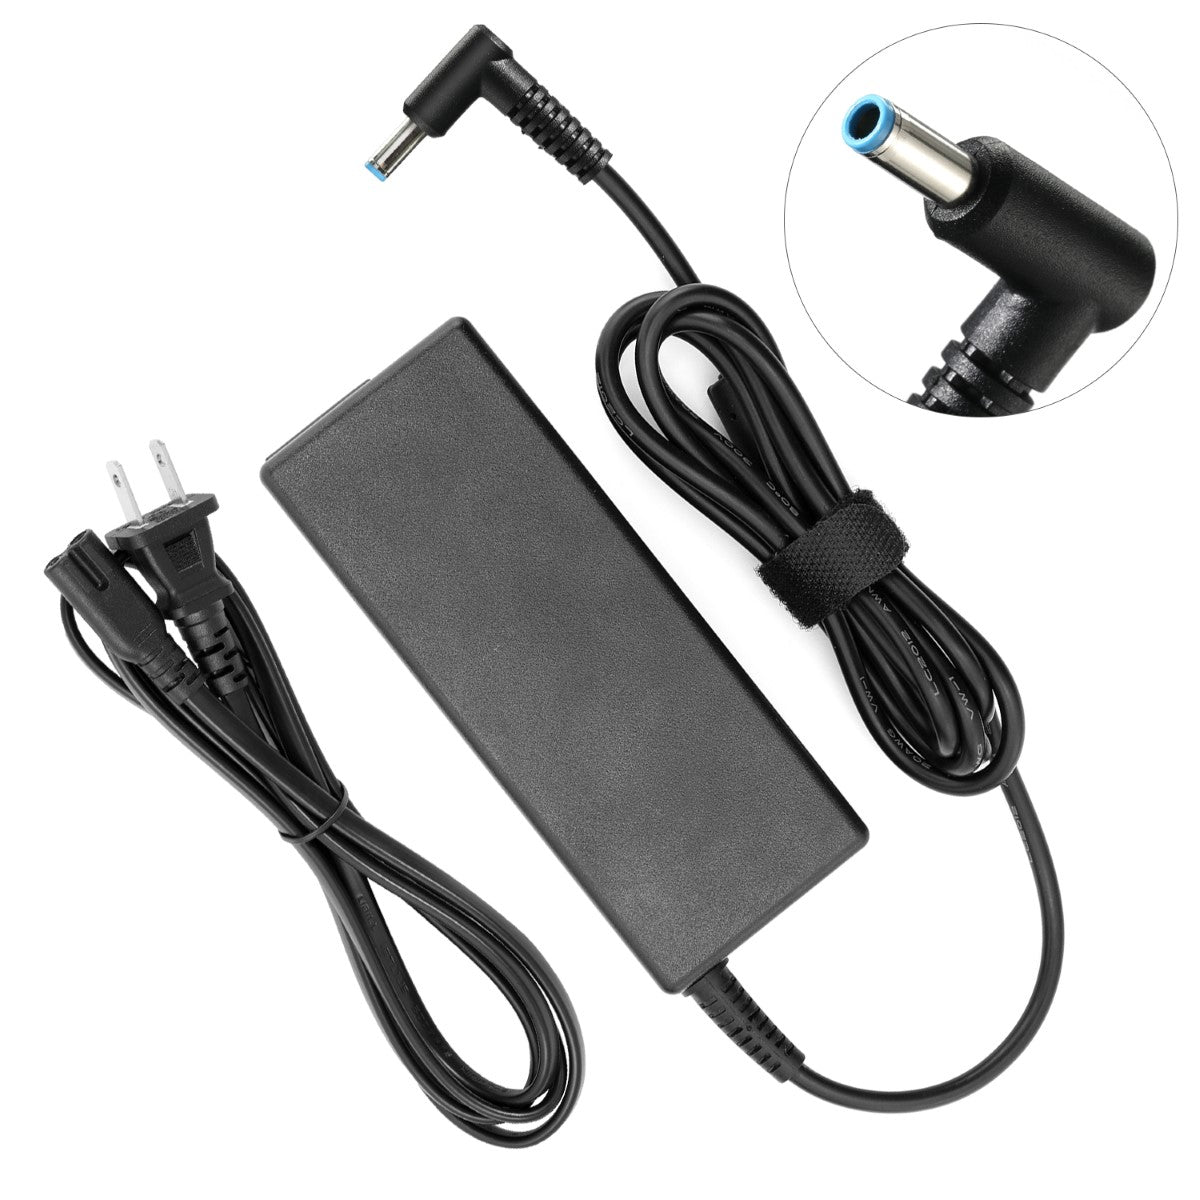 AC Adapter Charger for HP Envy Touchsmart 17-j000 Notebook.